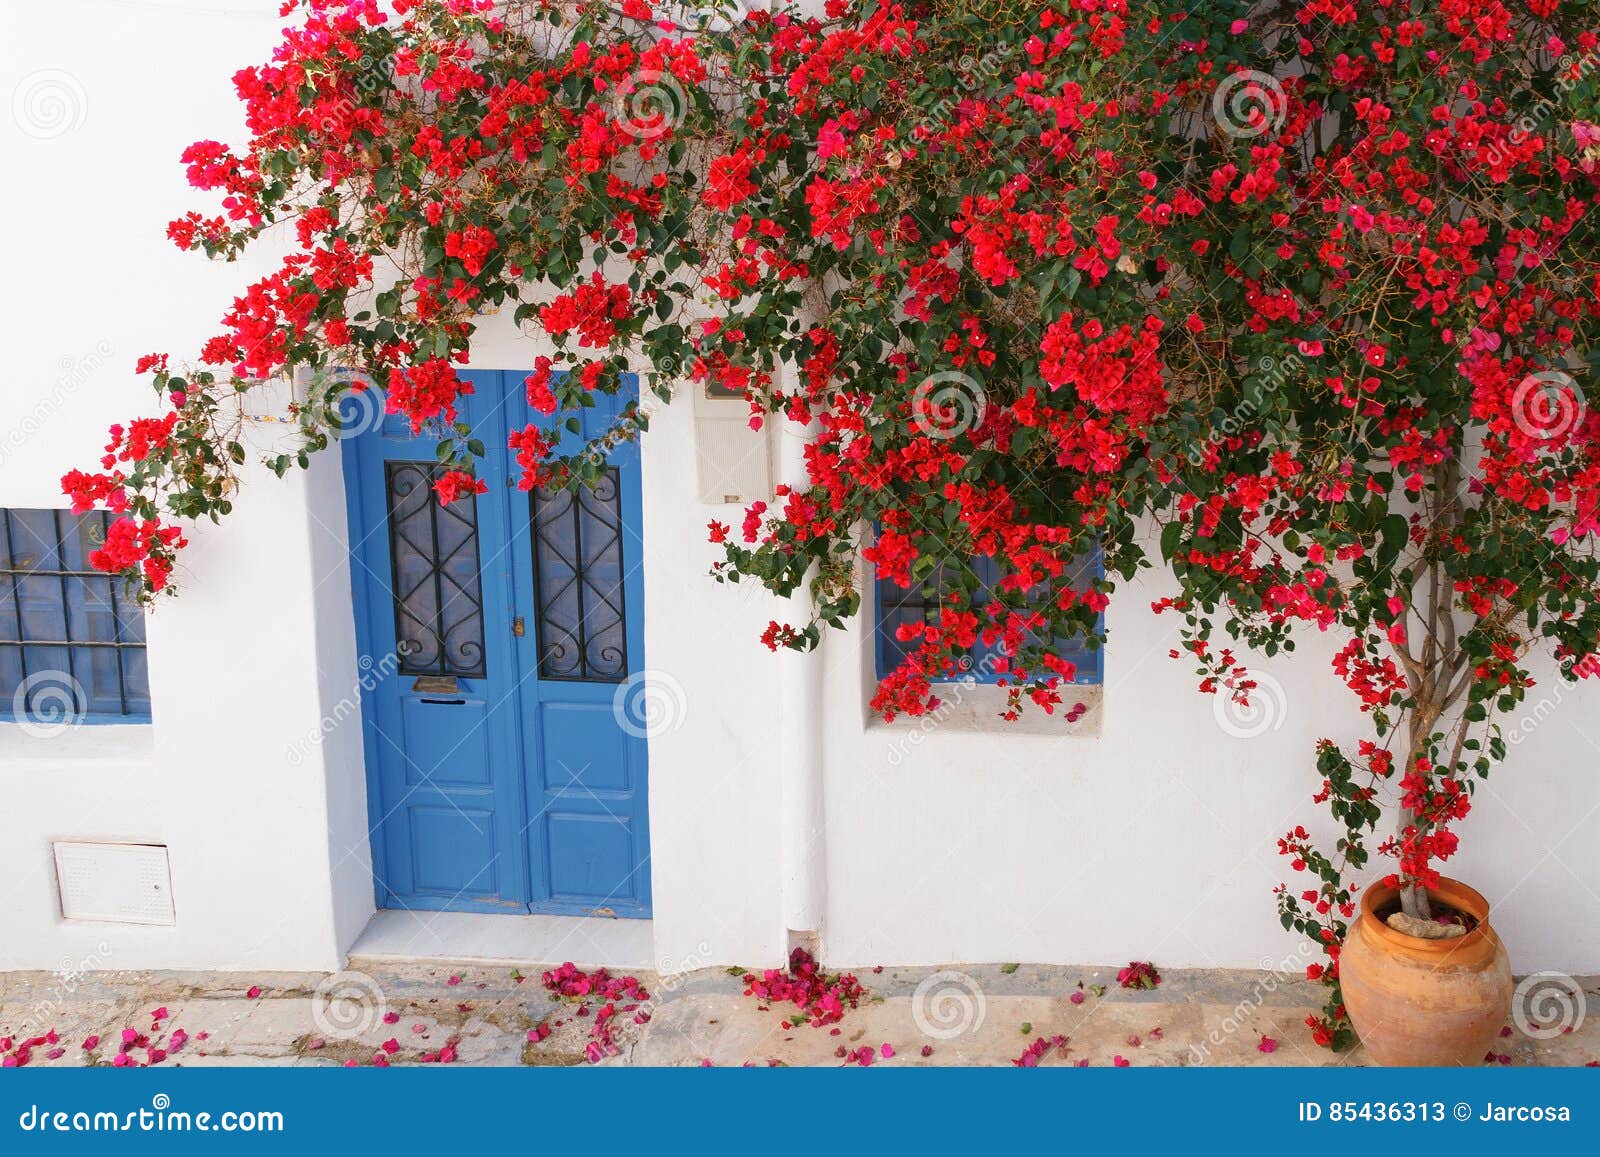 bougainvillea flowered on the facade of a house typical of nijar, andalusia, spain